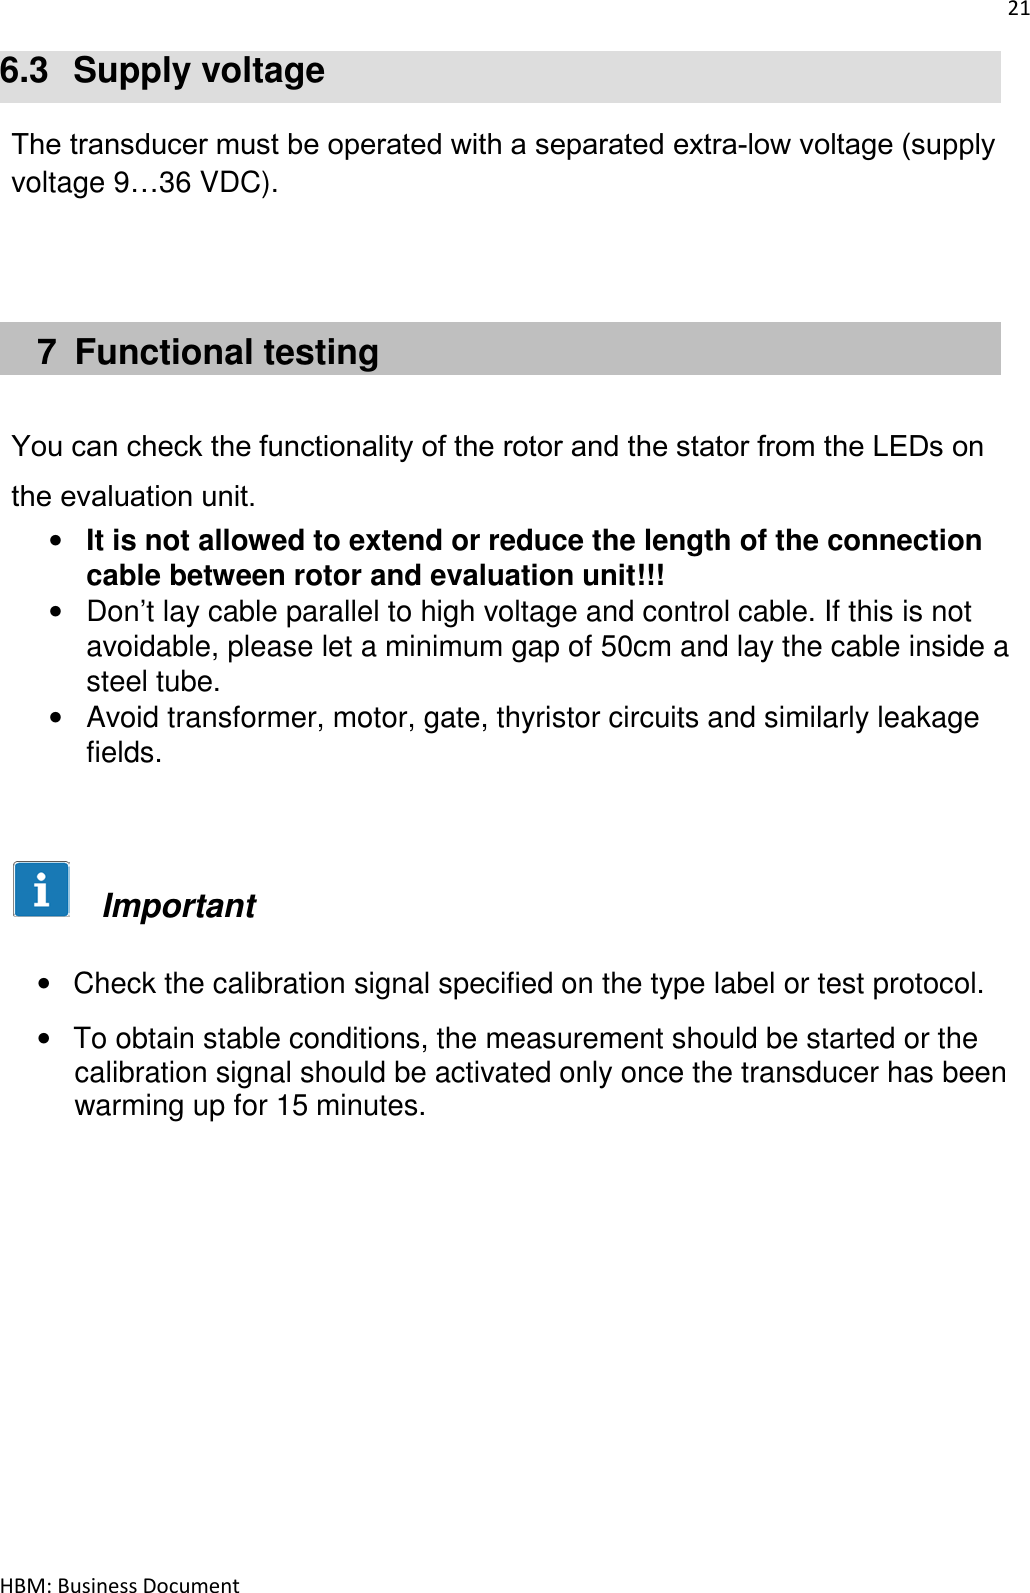 21  HBM: Business Document 6.3  Supply voltage  The transducer must be operated with a separated extra‐low voltage (supply voltage 9…36 VDC).      7  Functional testing   You can check the functionality of the rotor and the stator from the LEDs on the evaluation unit. • It is not allowed to extend or reduce the length of the connection cable between rotor and evaluation unit!!! •  Don’t lay cable parallel to high voltage and control cable. If this is not avoidable, please let a minimum gap of 50cm and lay the cable inside a steel tube. •  Avoid transformer, motor, gate, thyristor circuits and similarly leakage fields.          Important  •  Check the calibration signal specified on the type label or test protocol. •  To obtain stable conditions, the measurement should be started or the calibration signal should be activated only once the transducer has been warming up for 15 minutes.             